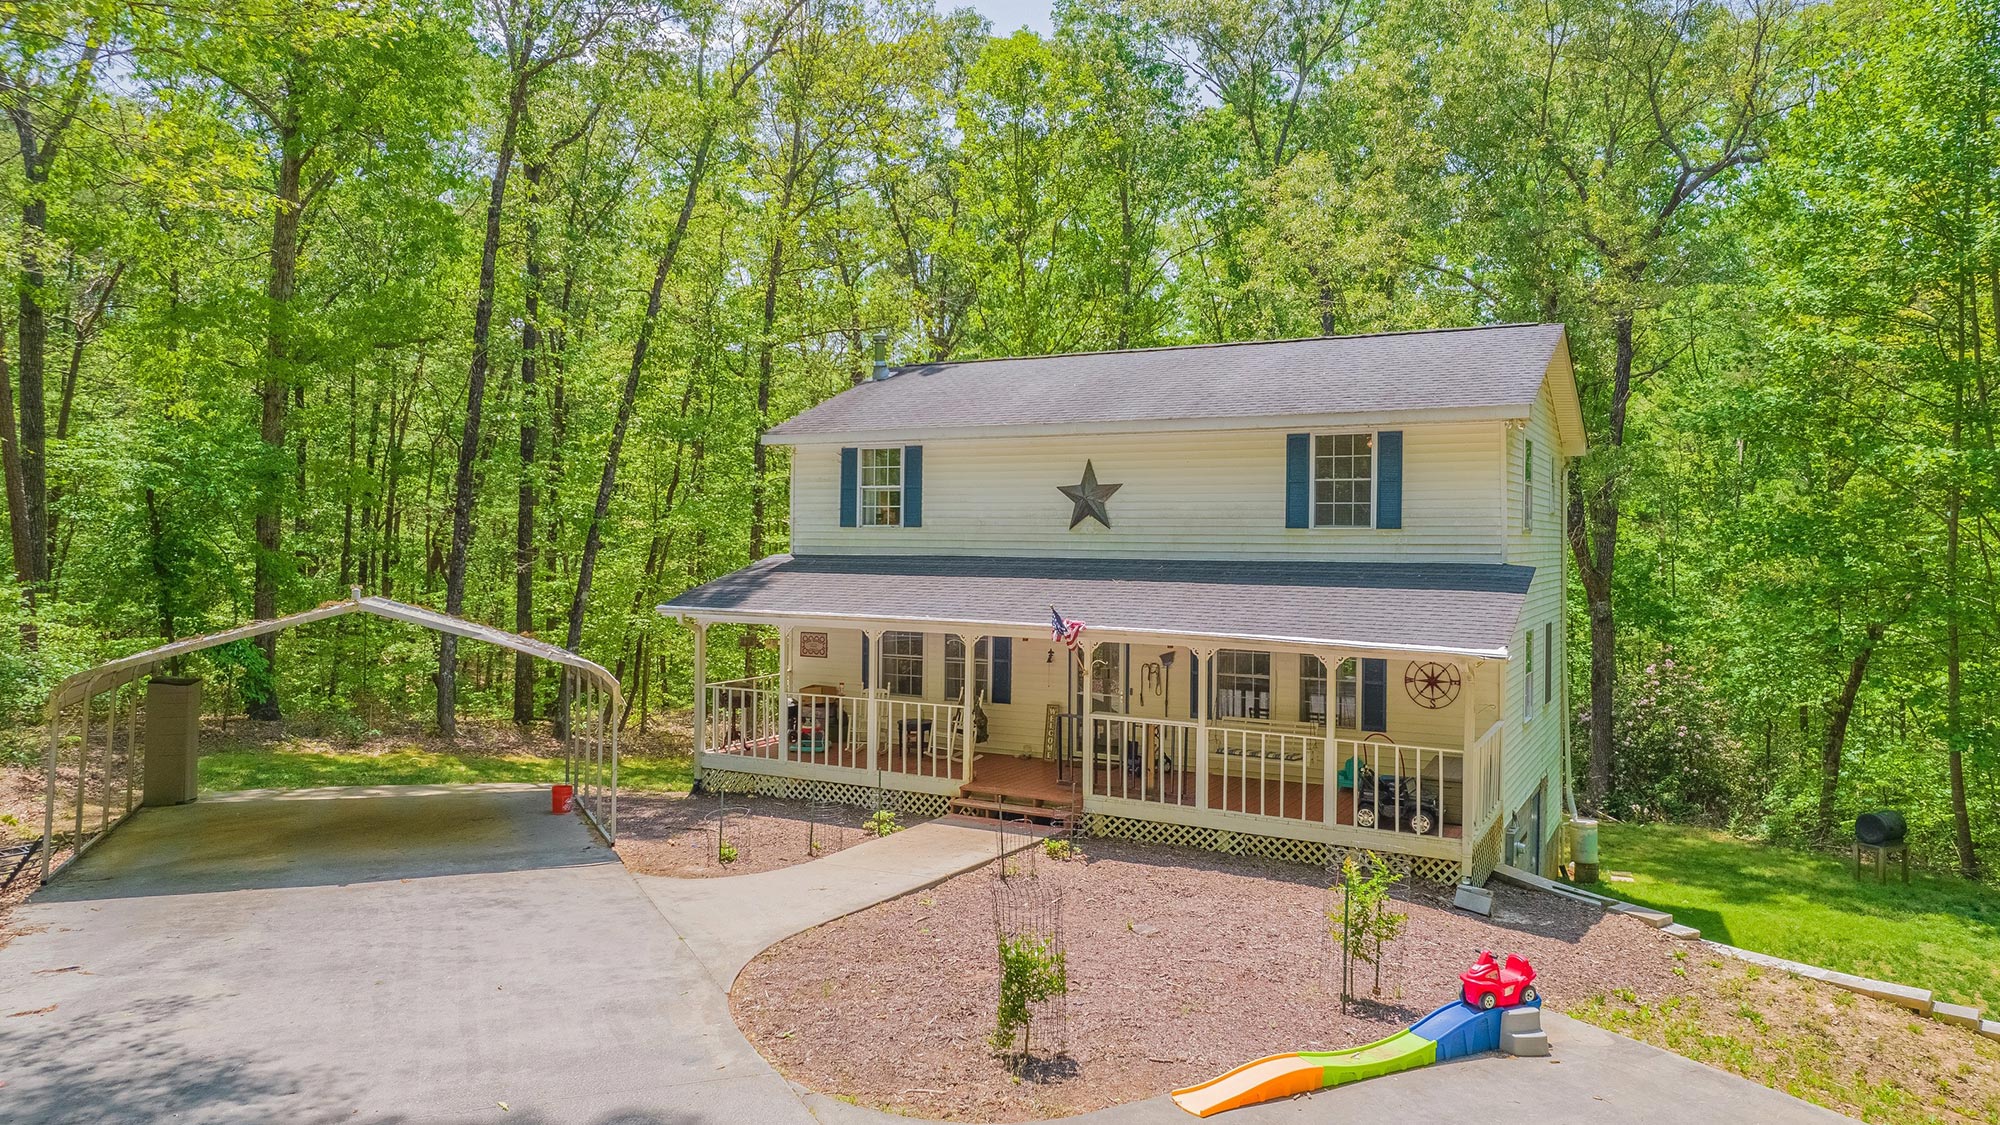 Toccoa Real Estate: Find Your Dream Home in the Foothills of Georgia